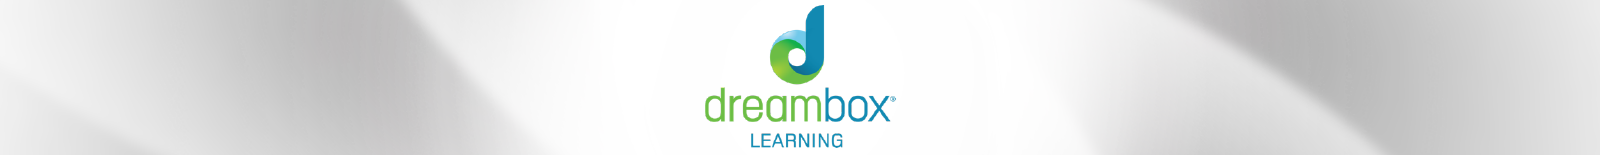 dreamboxlearning-web-banner-cobb-county-ga.19b94045550.png